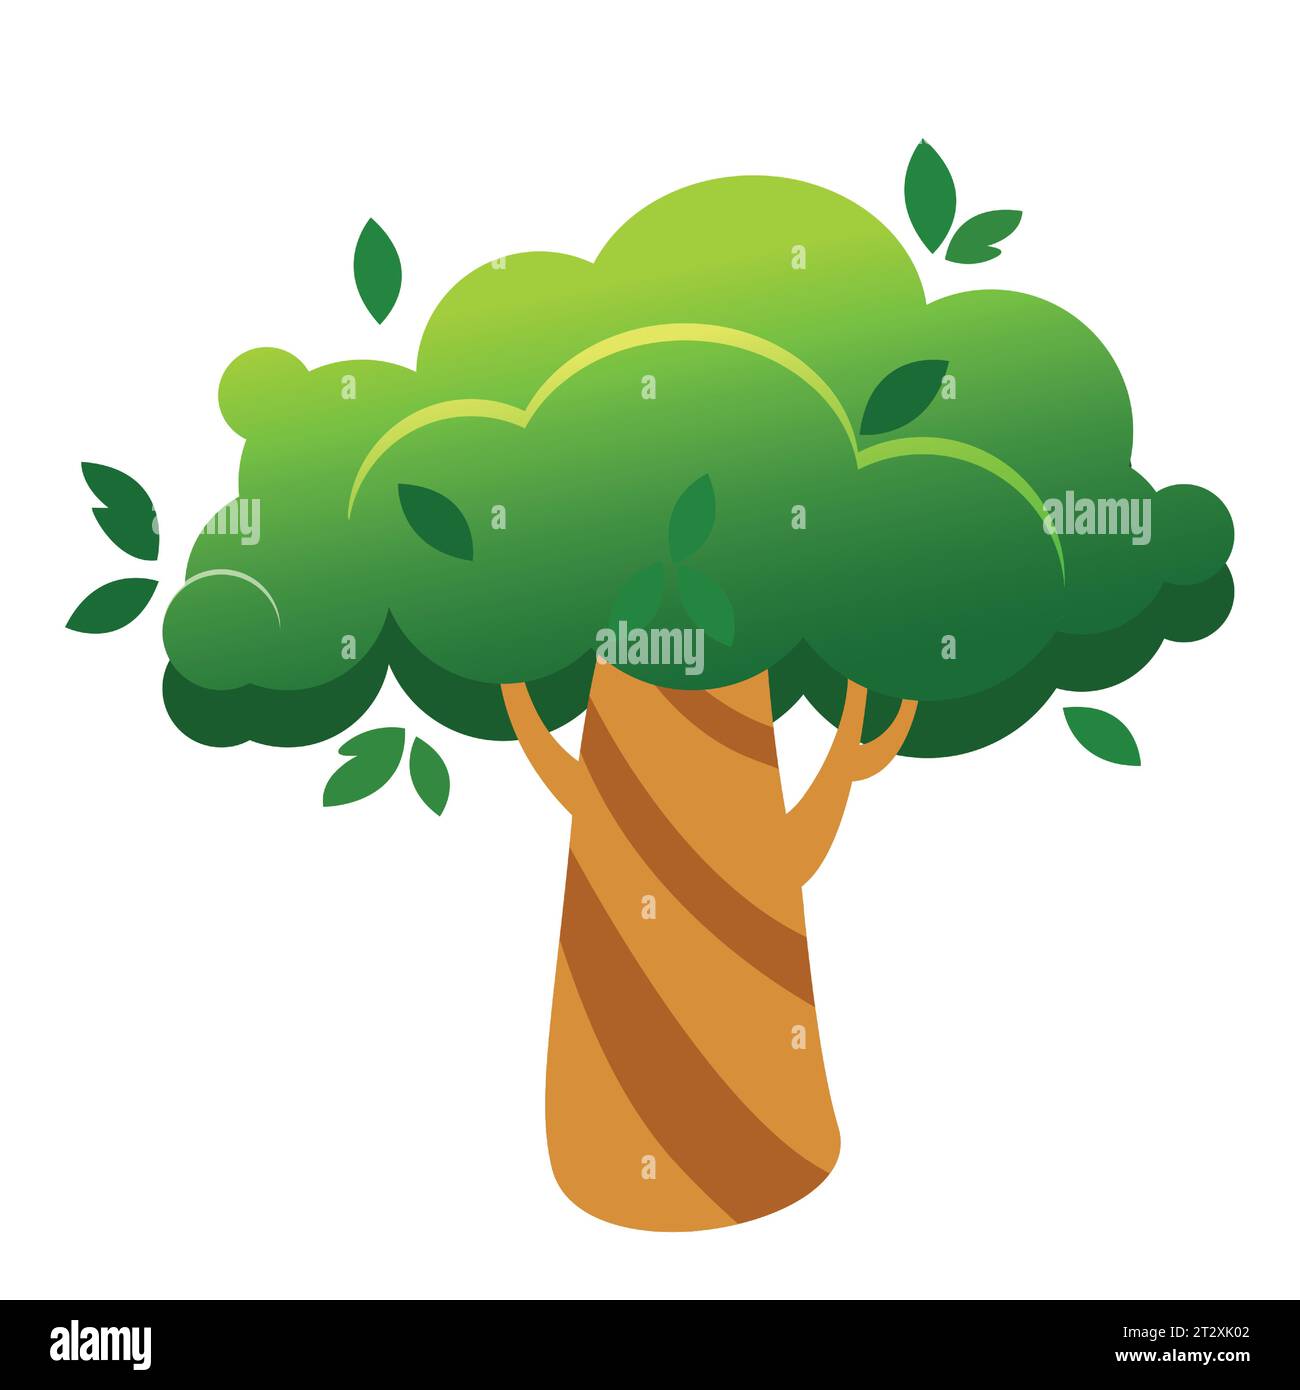 The tree is covered with greenery. Summer tree illustration in cartoon style isolated on white background. Stock Vector